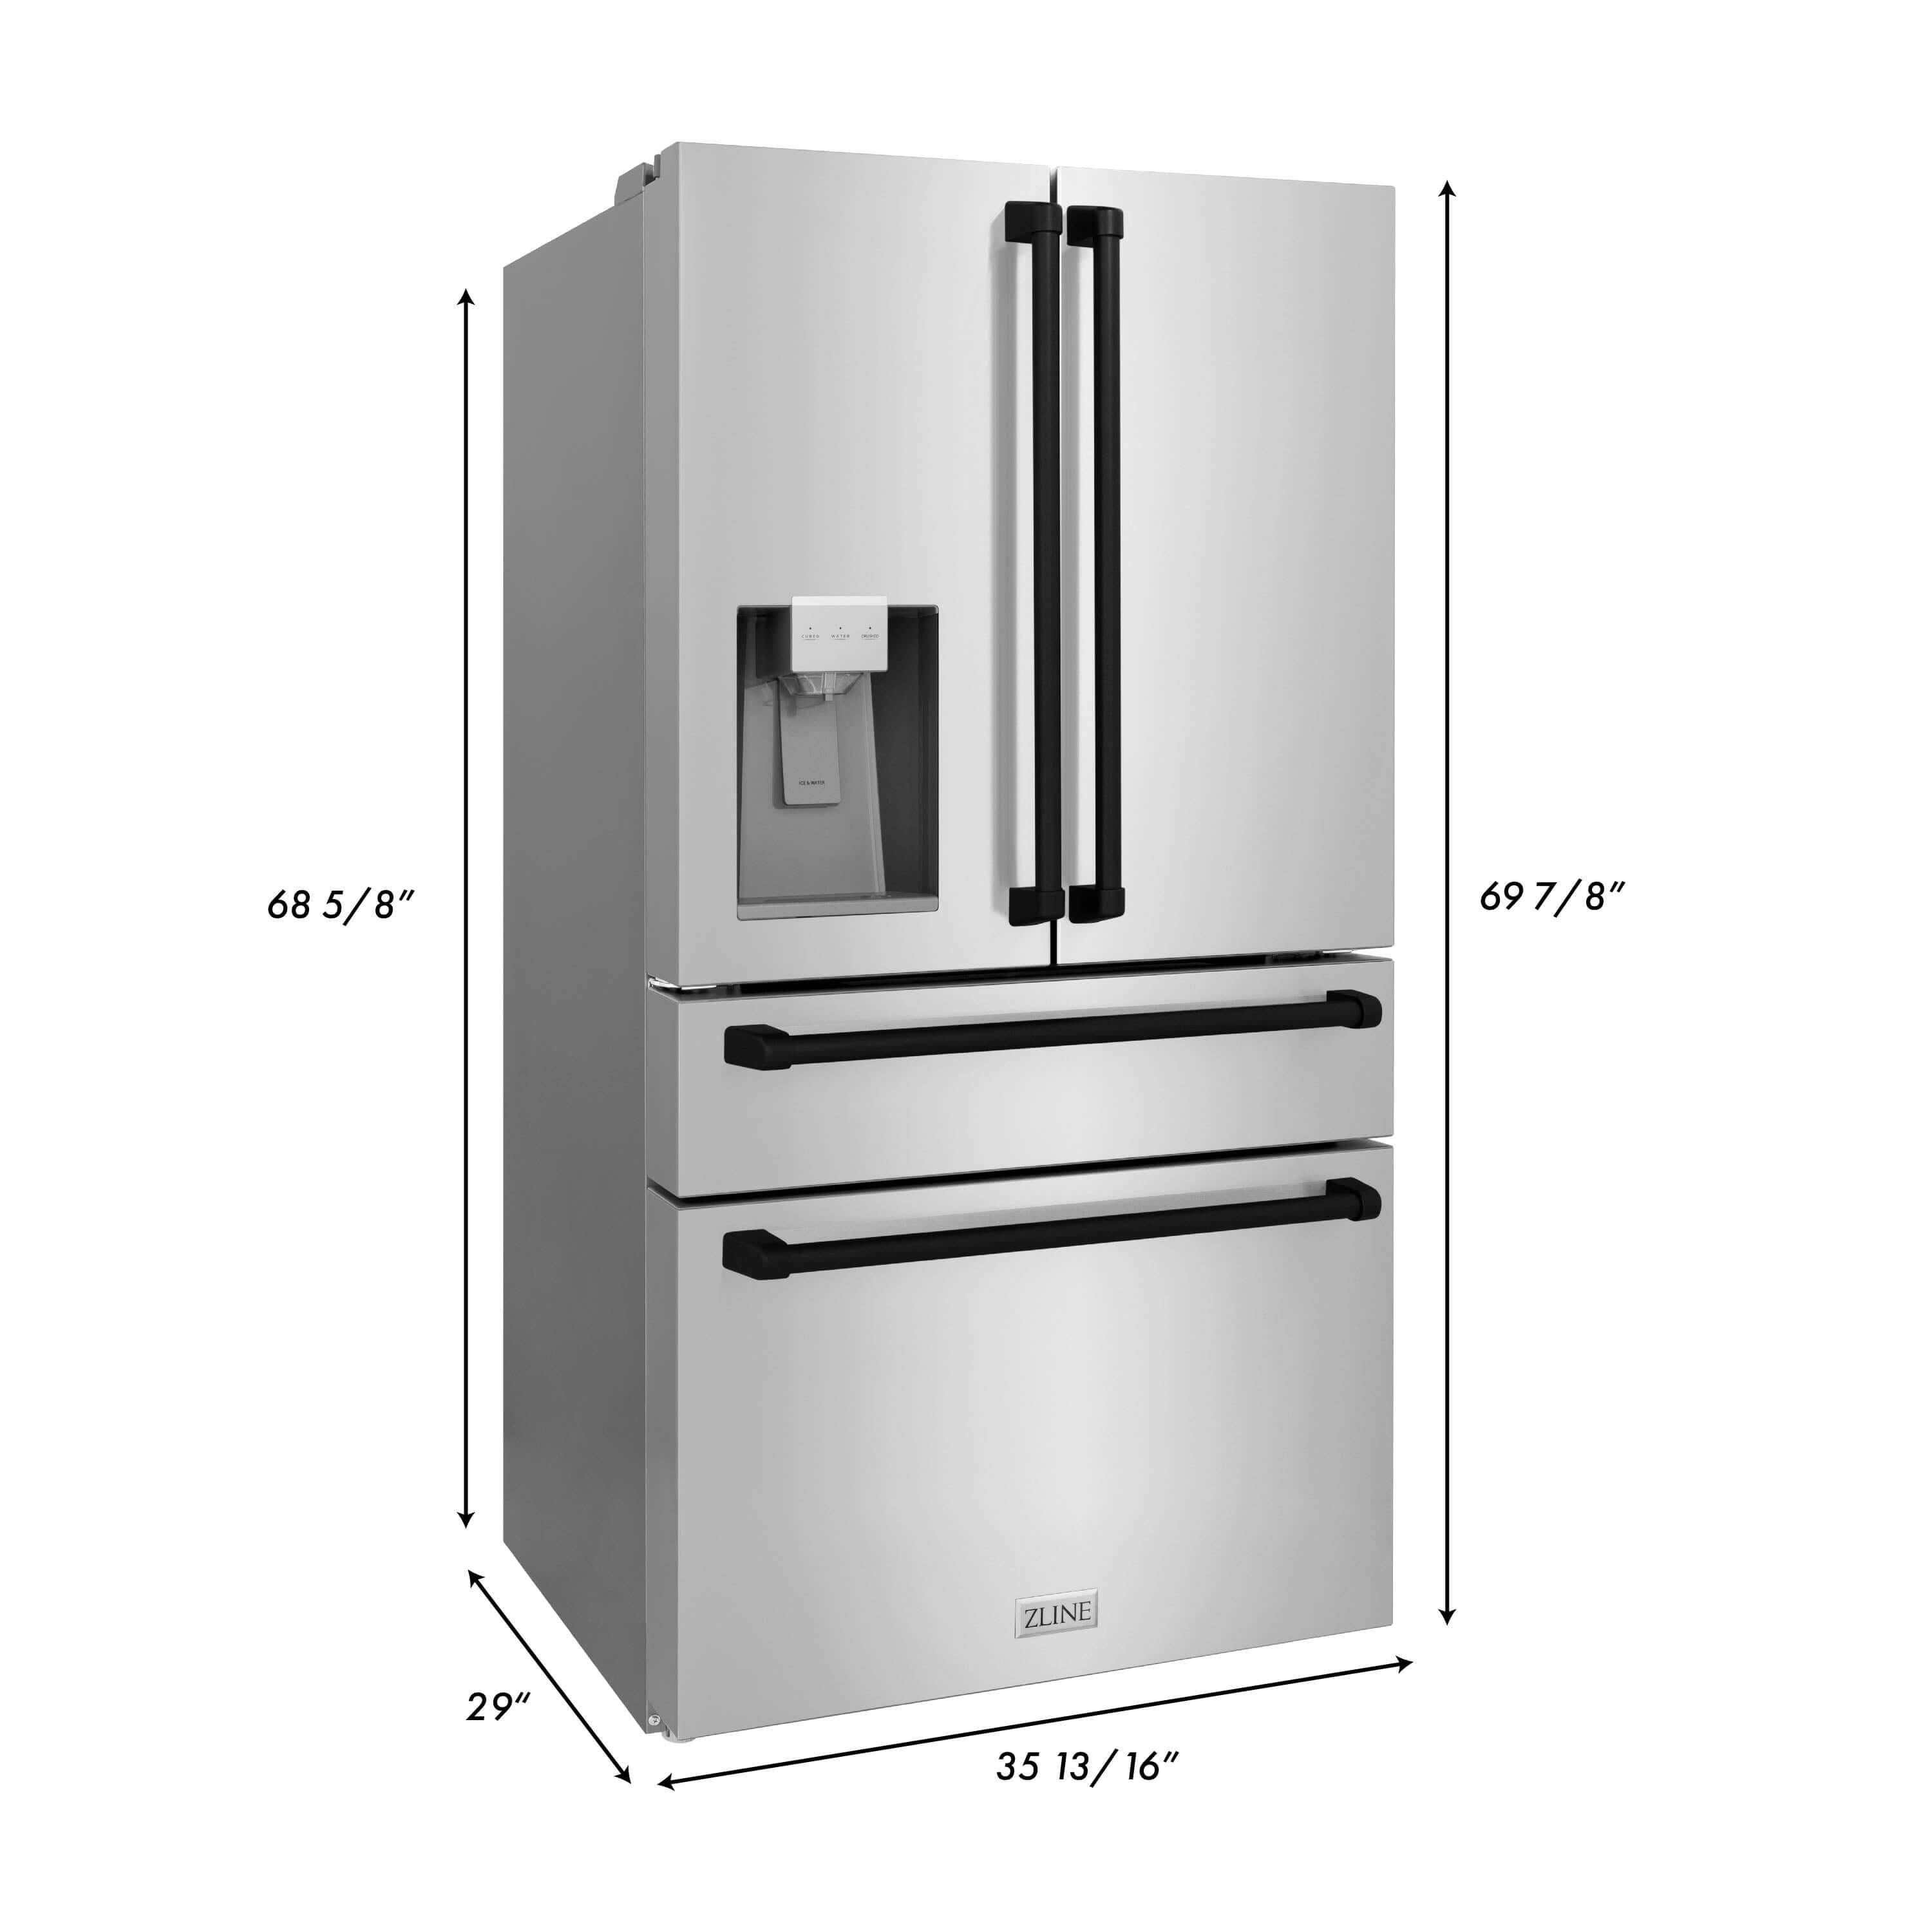 ZLINE Autograph Edition 36" French door refrigerator with water/ice dispenser dimensional measurements.